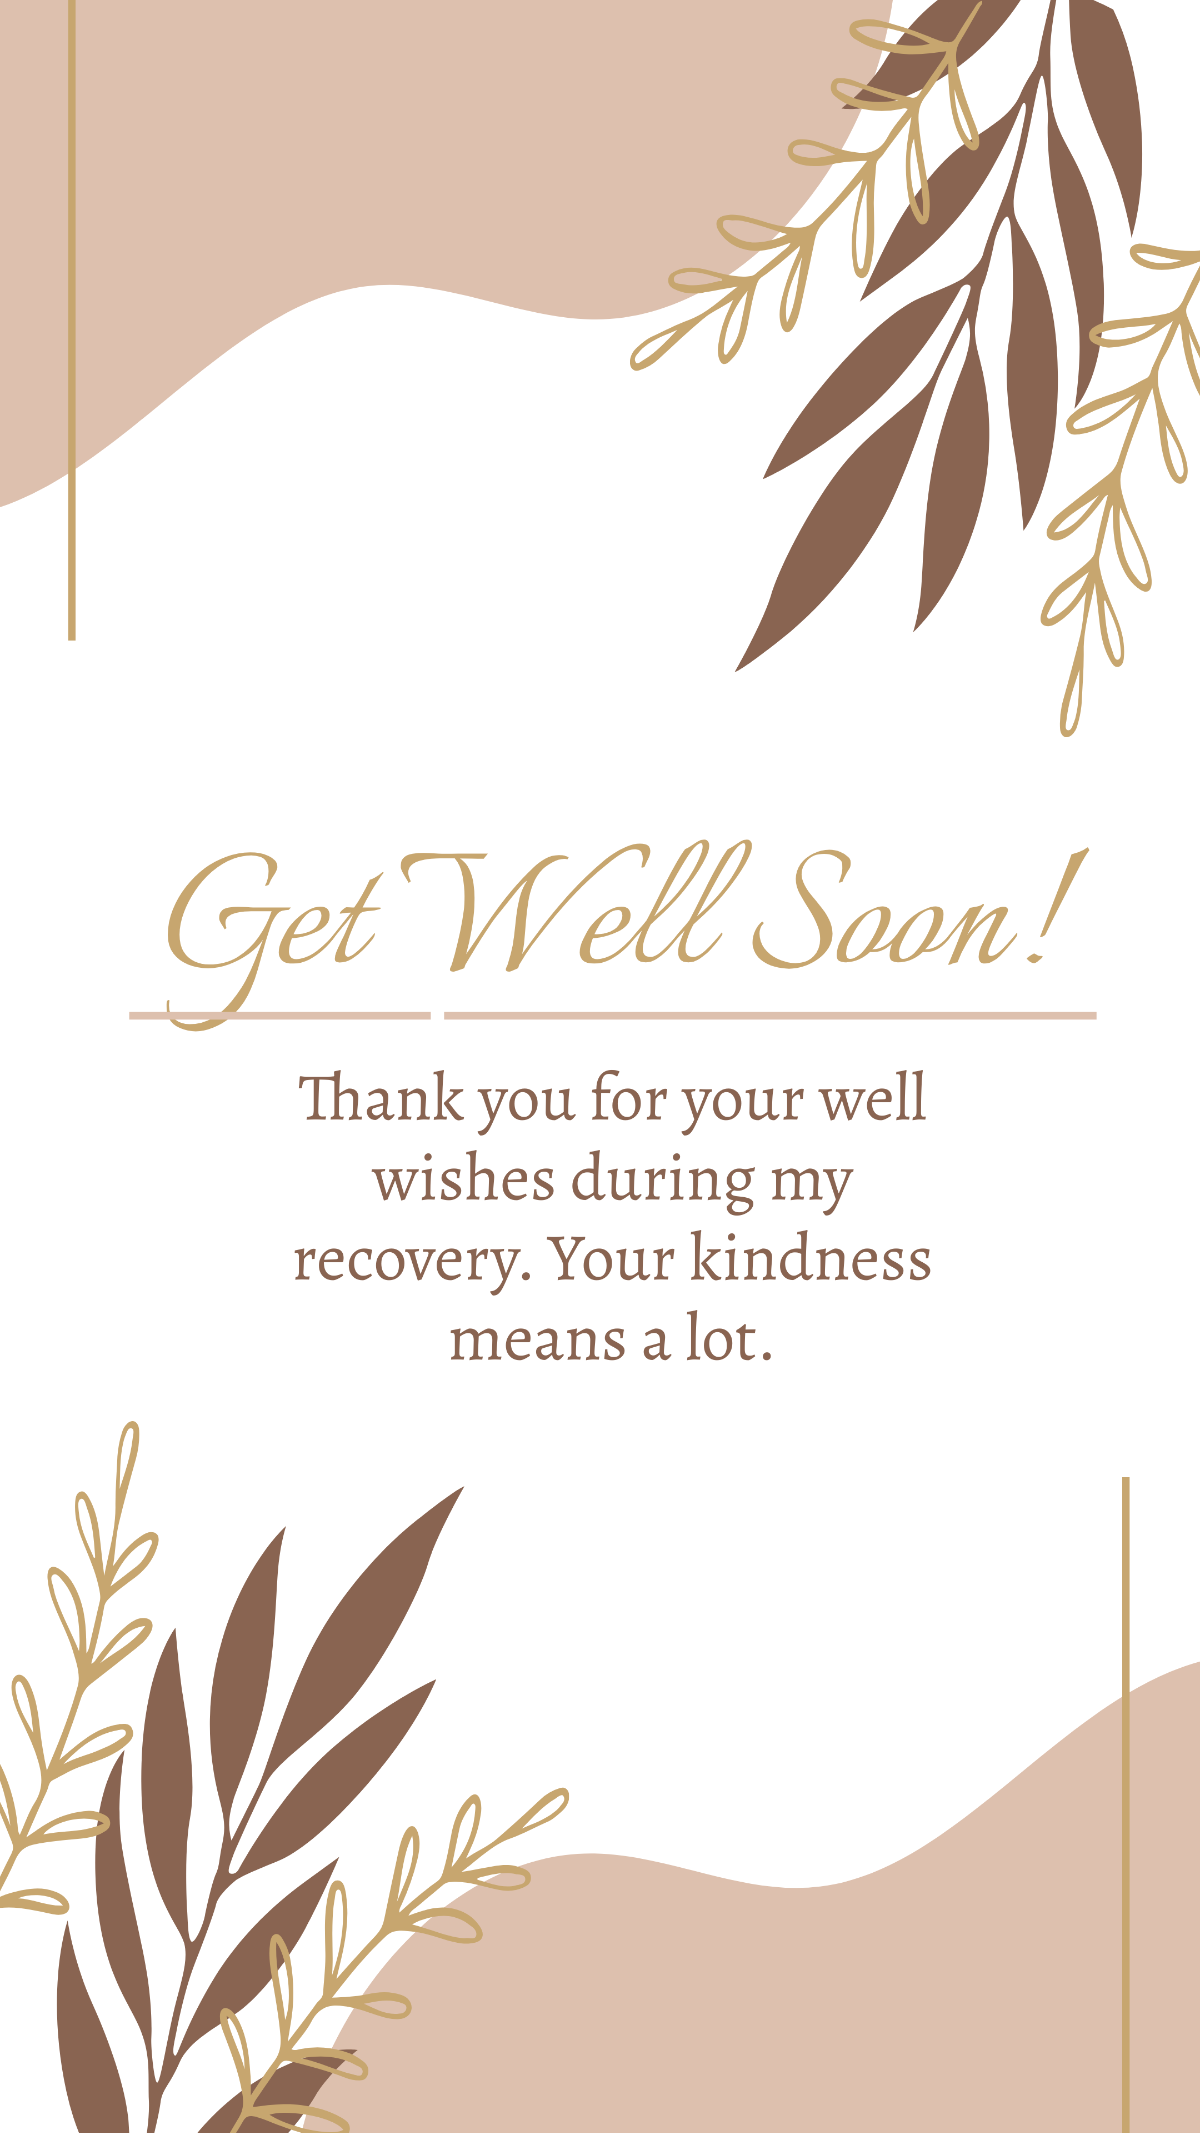 Get Well Soon Thank You Card